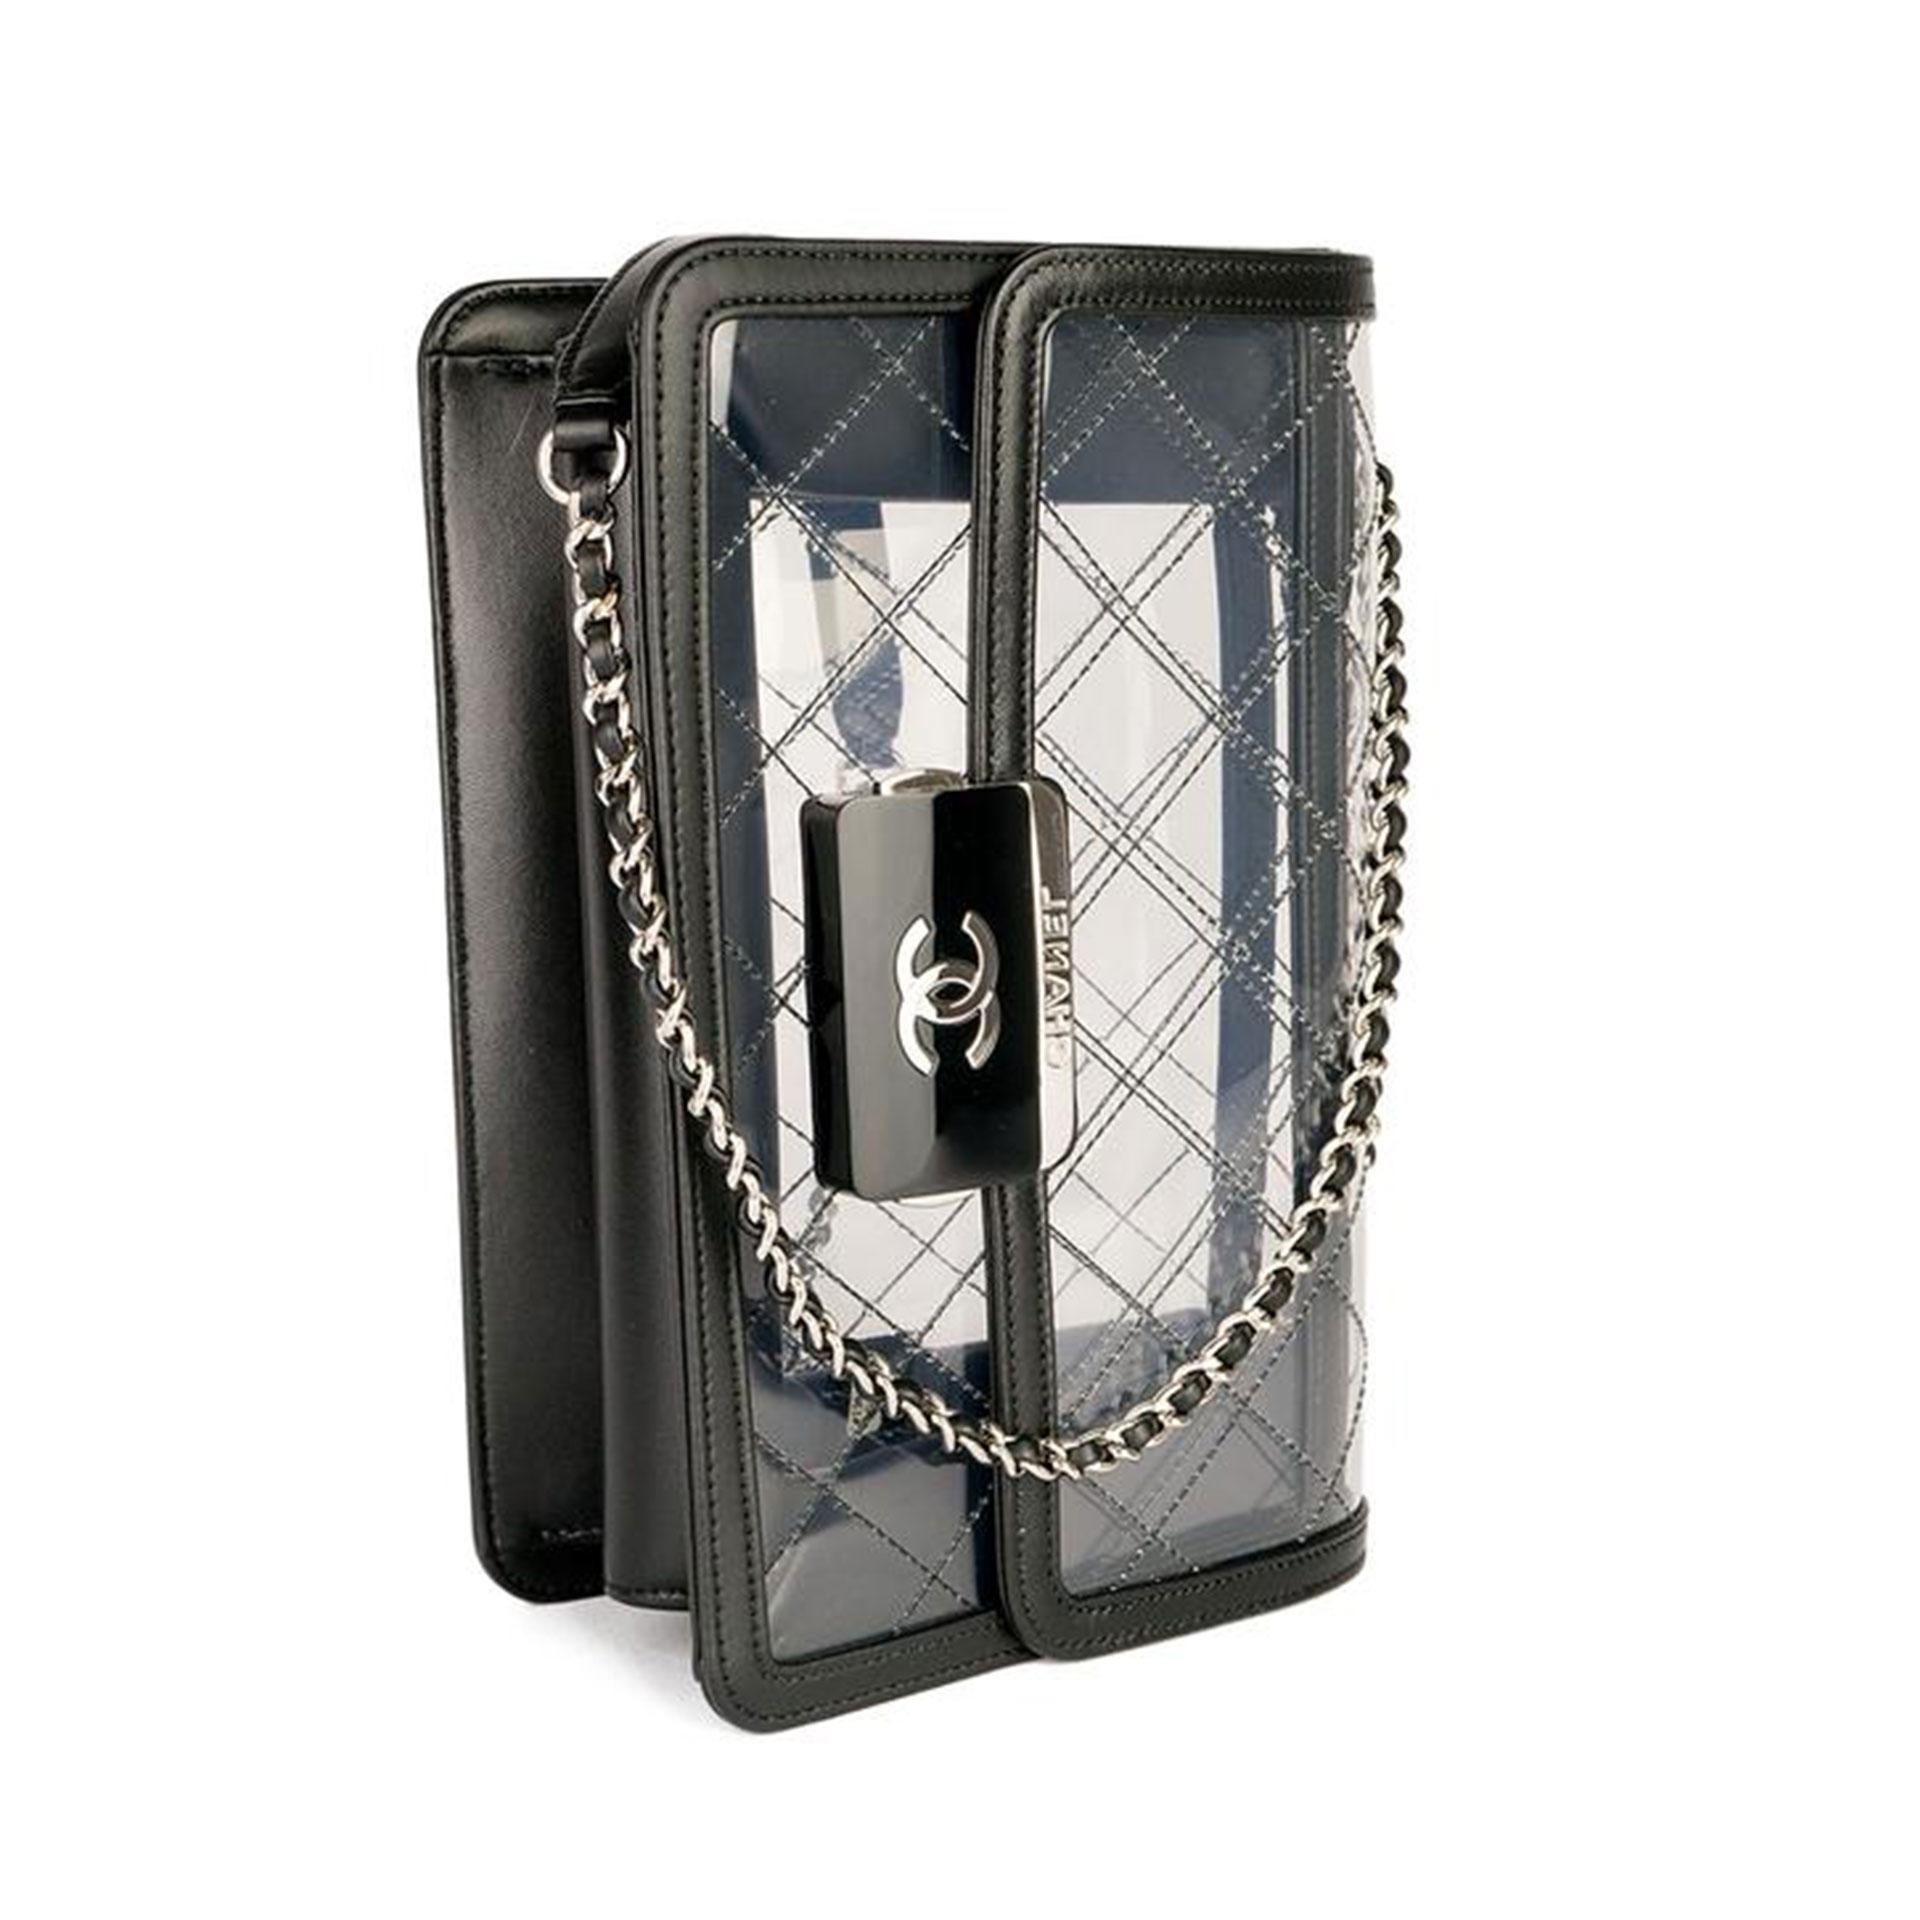 Chanel naked transparent flap with lambskin leather and Chanel engraved beauty push lock closure. Iconic new style of Chanel's  transparent flaps with accordion bottom and two interior compartments. 

7